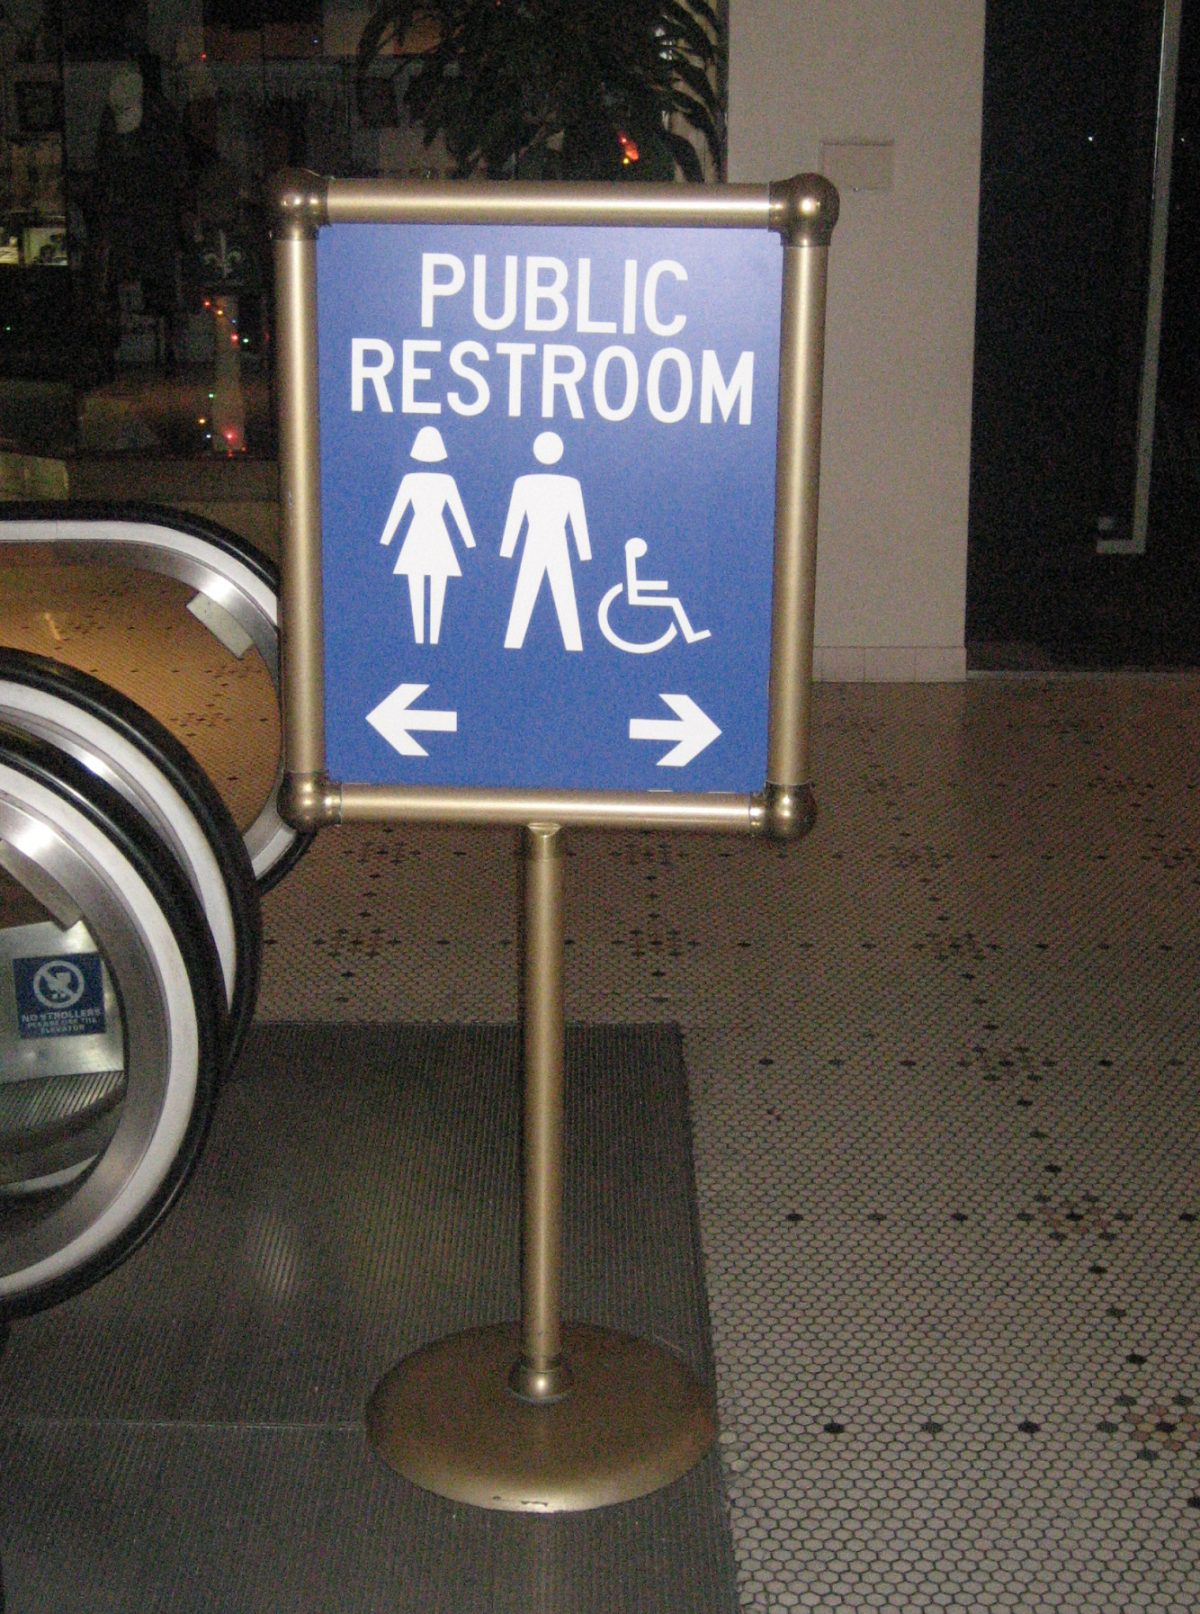 Sign with directions to the restroom pointing left and right